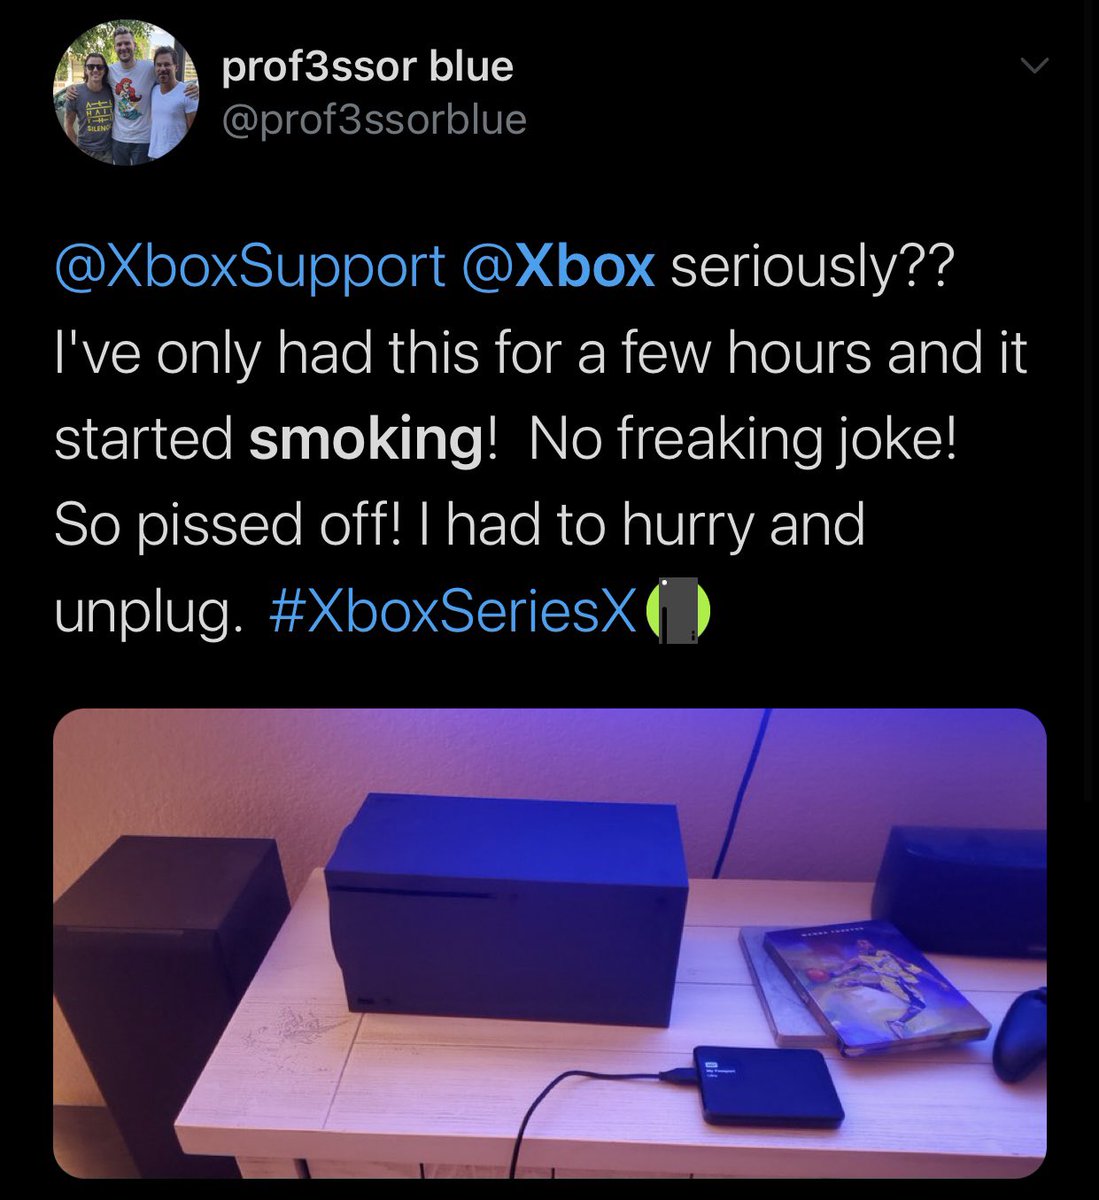 More cases of Xbox’s smoking  https://www.reddit.com/r/xbox/comments/js32qa/my_xbox_series_x_just_started_smoking/?utm_source=share&utm_medium=ios_app&utm_name=iossmf